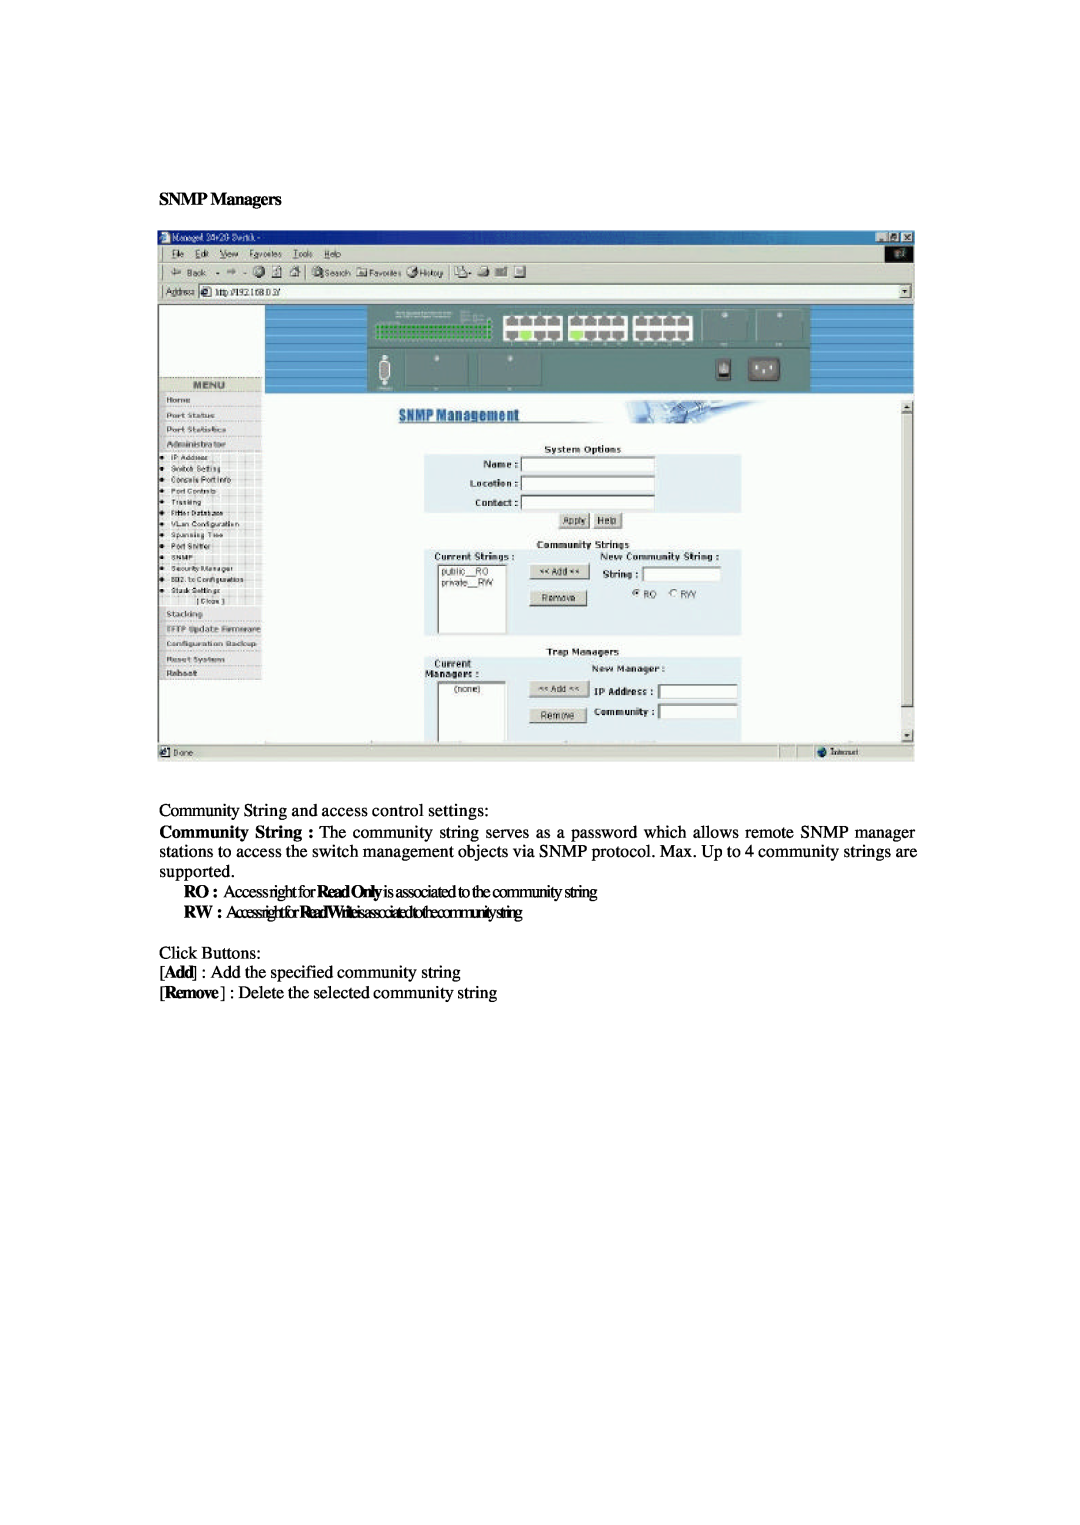 Xerox NS-2260 operation manual SNMP Managers 